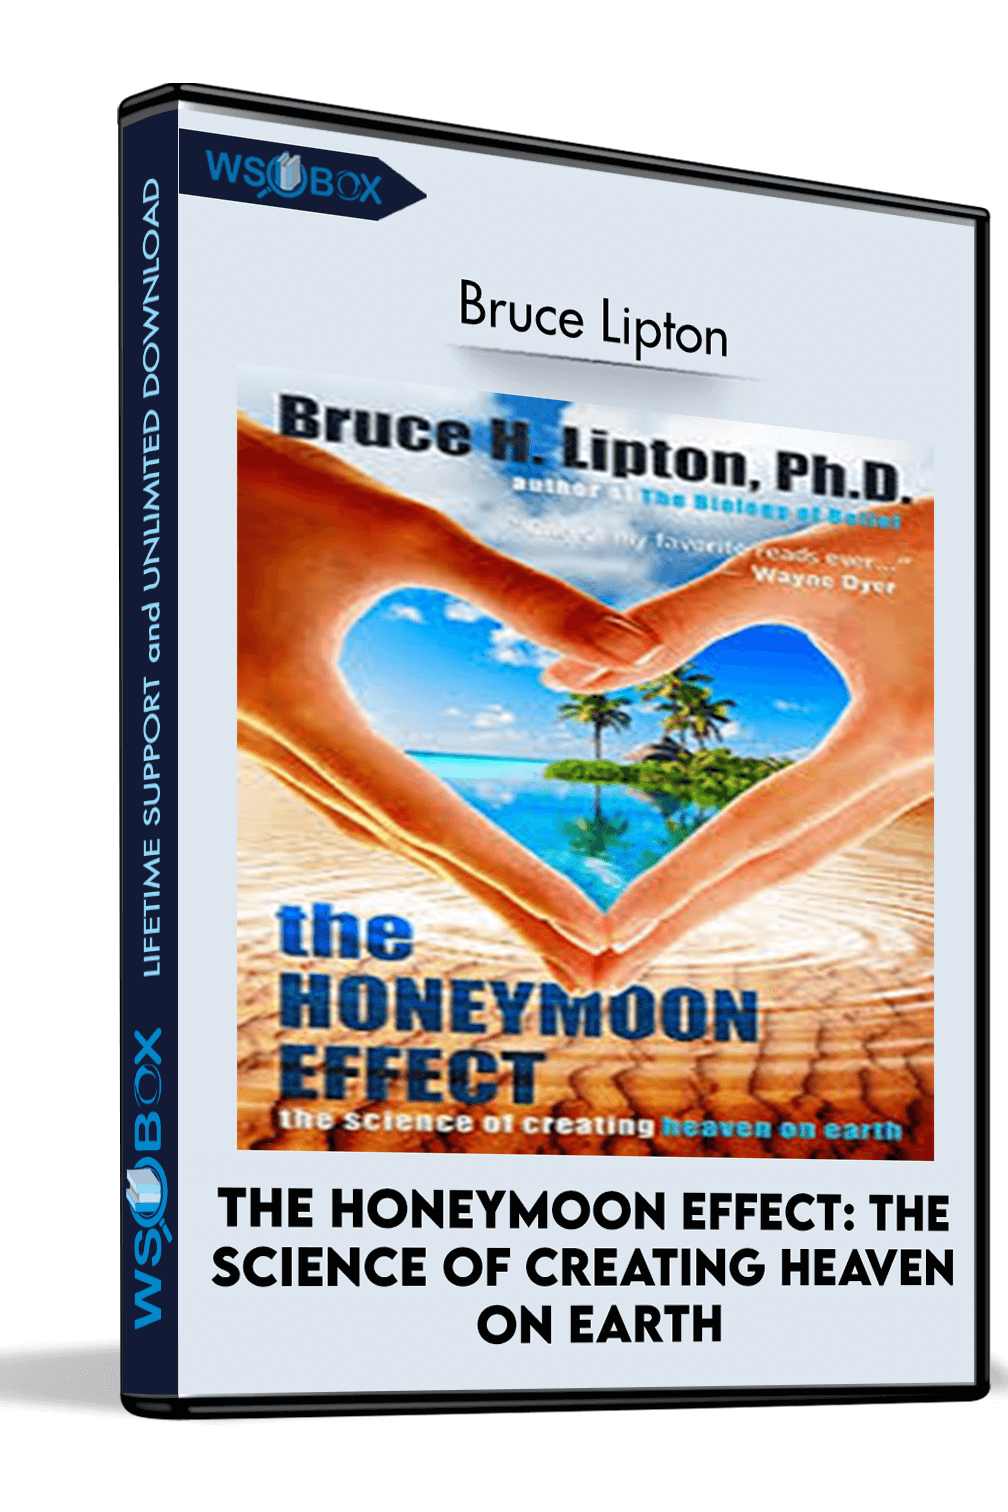 the-honeymoon-effect-the-science-of-creating-heaven-on-earth-bruce-lipton